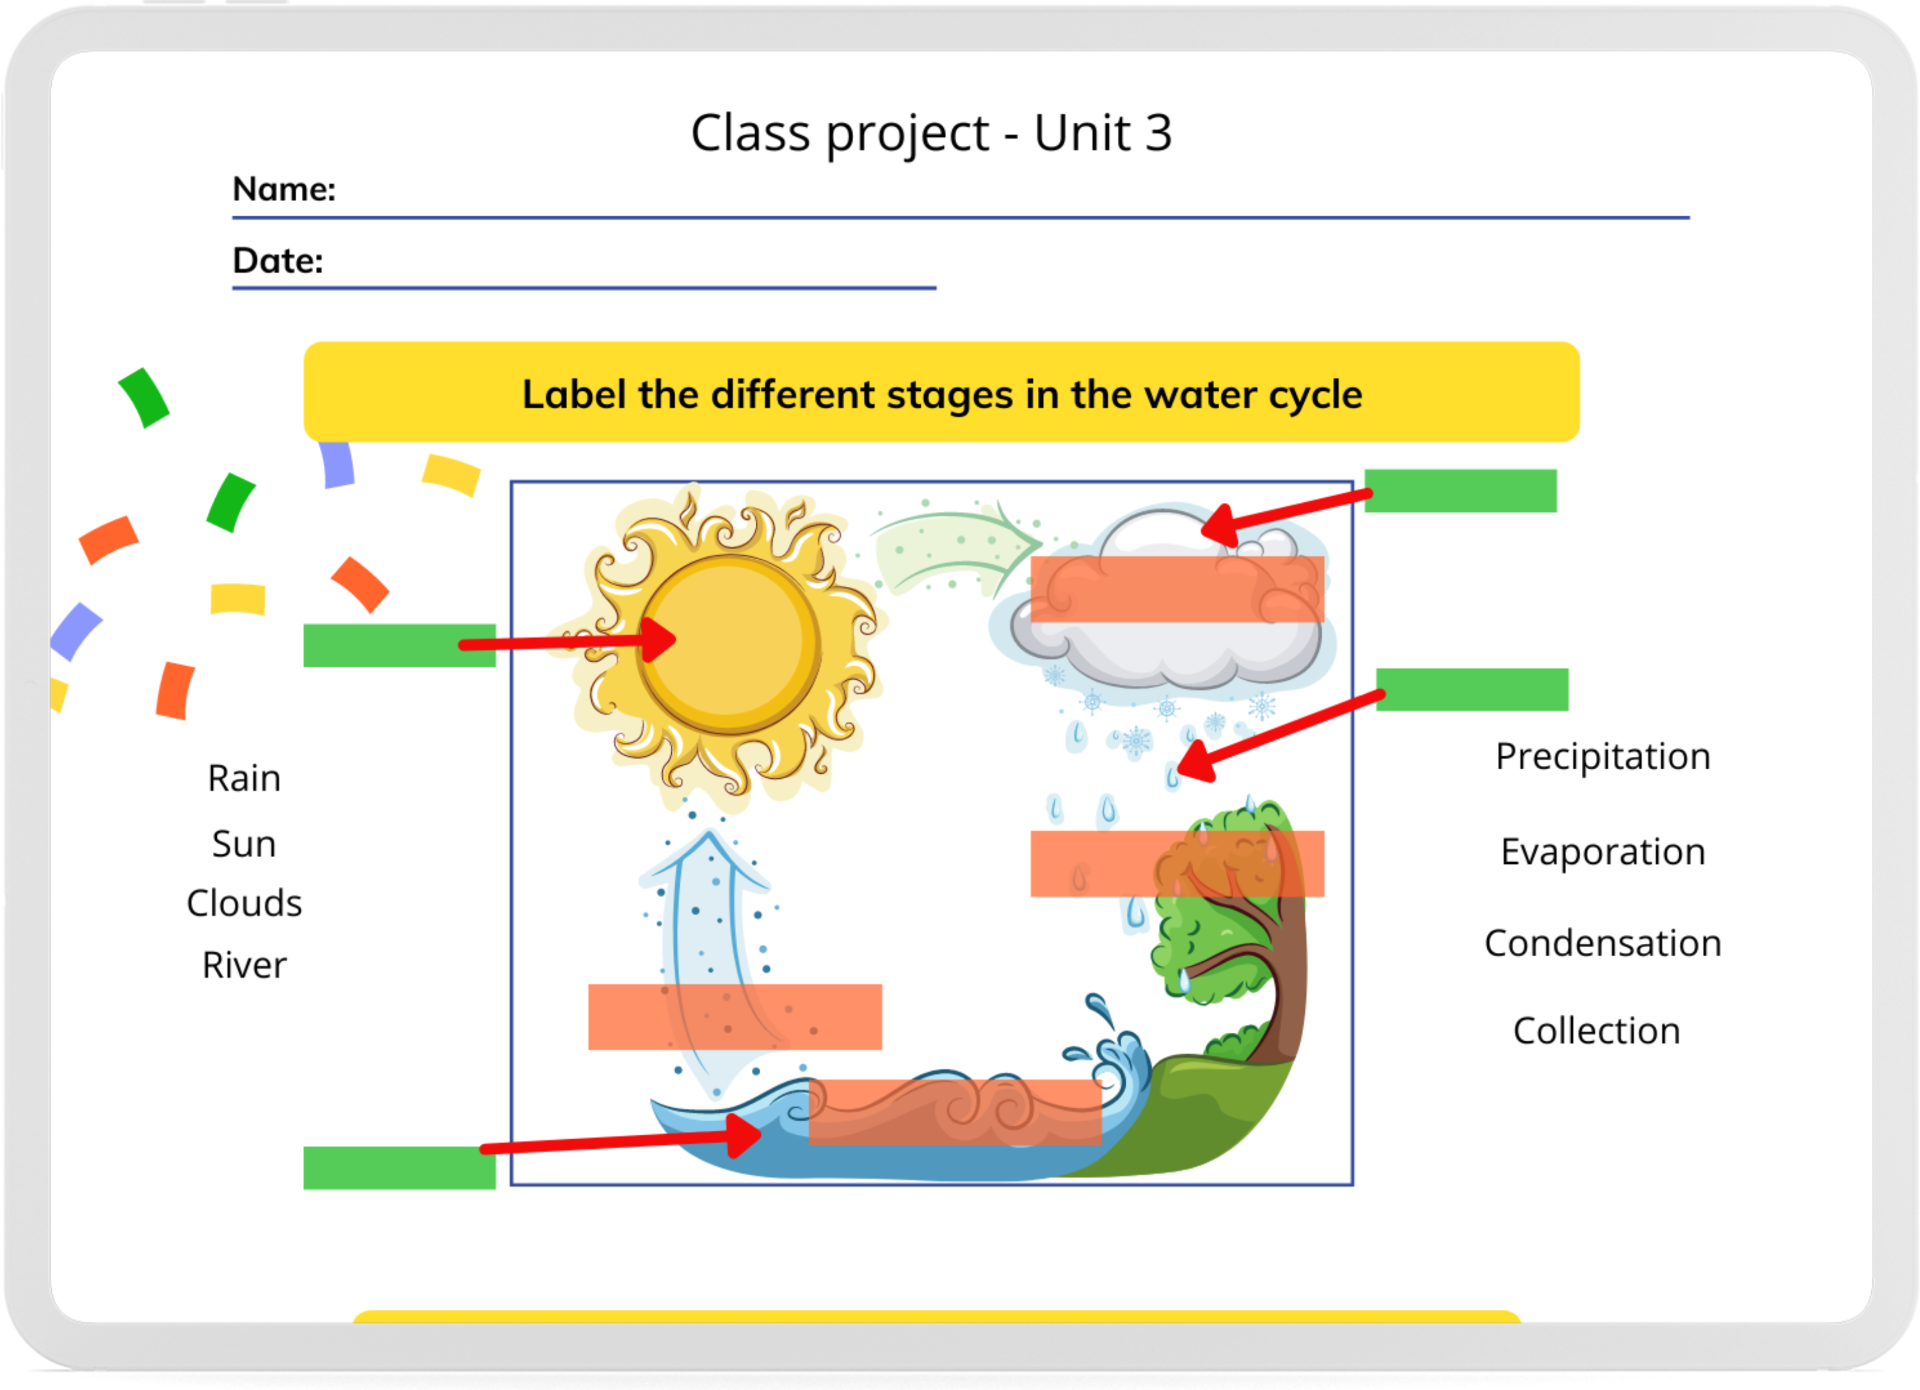 a class project on the stages of the water cycle